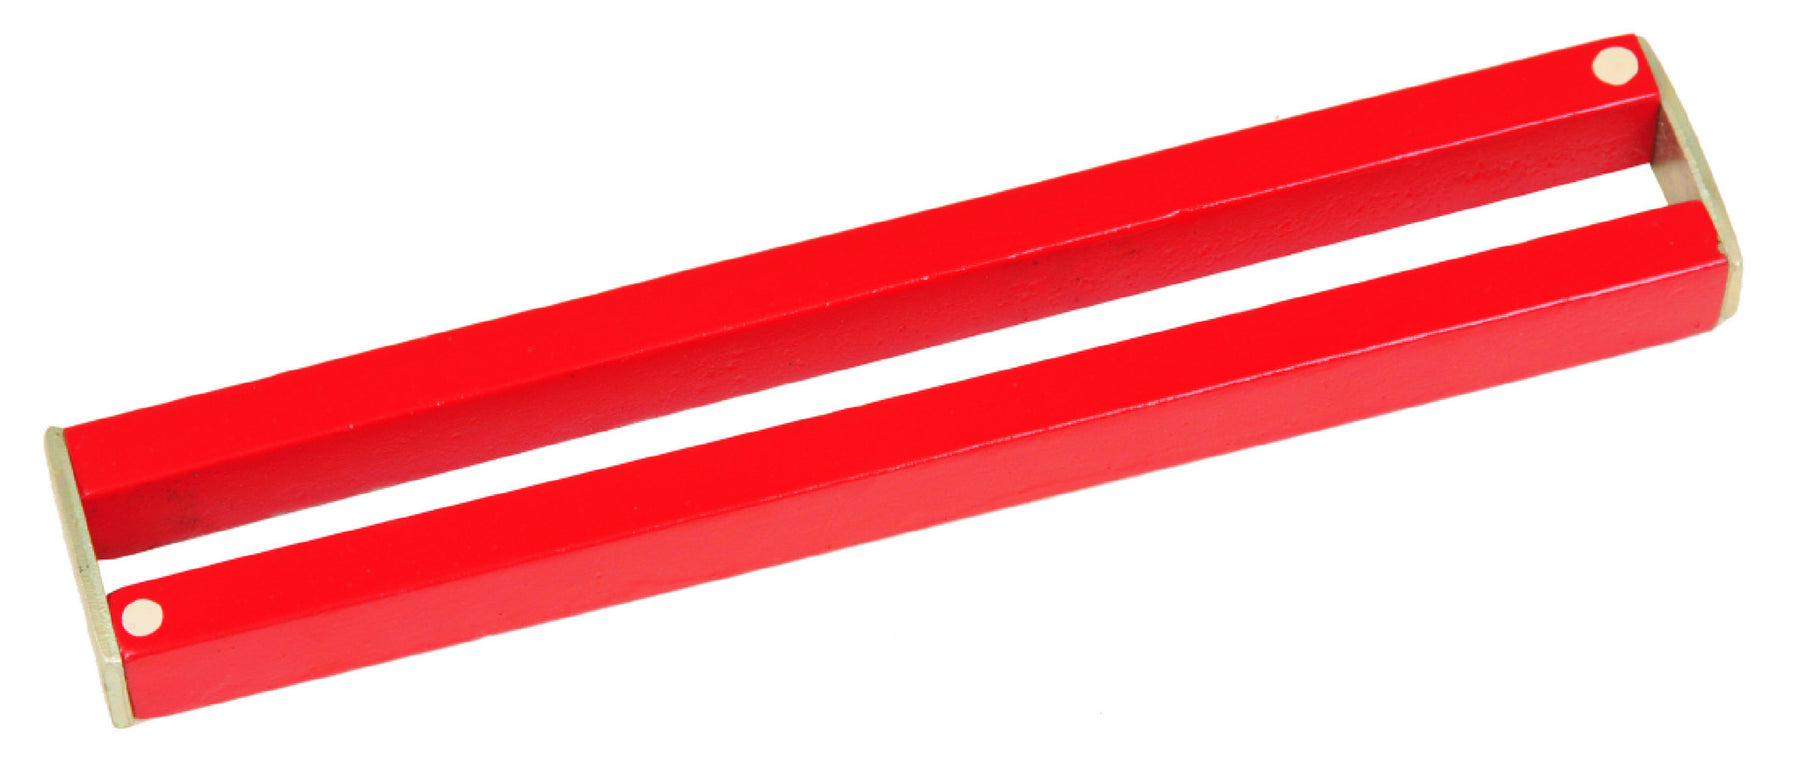 1.5" Alnico Bar Magnets (pair) with keeper